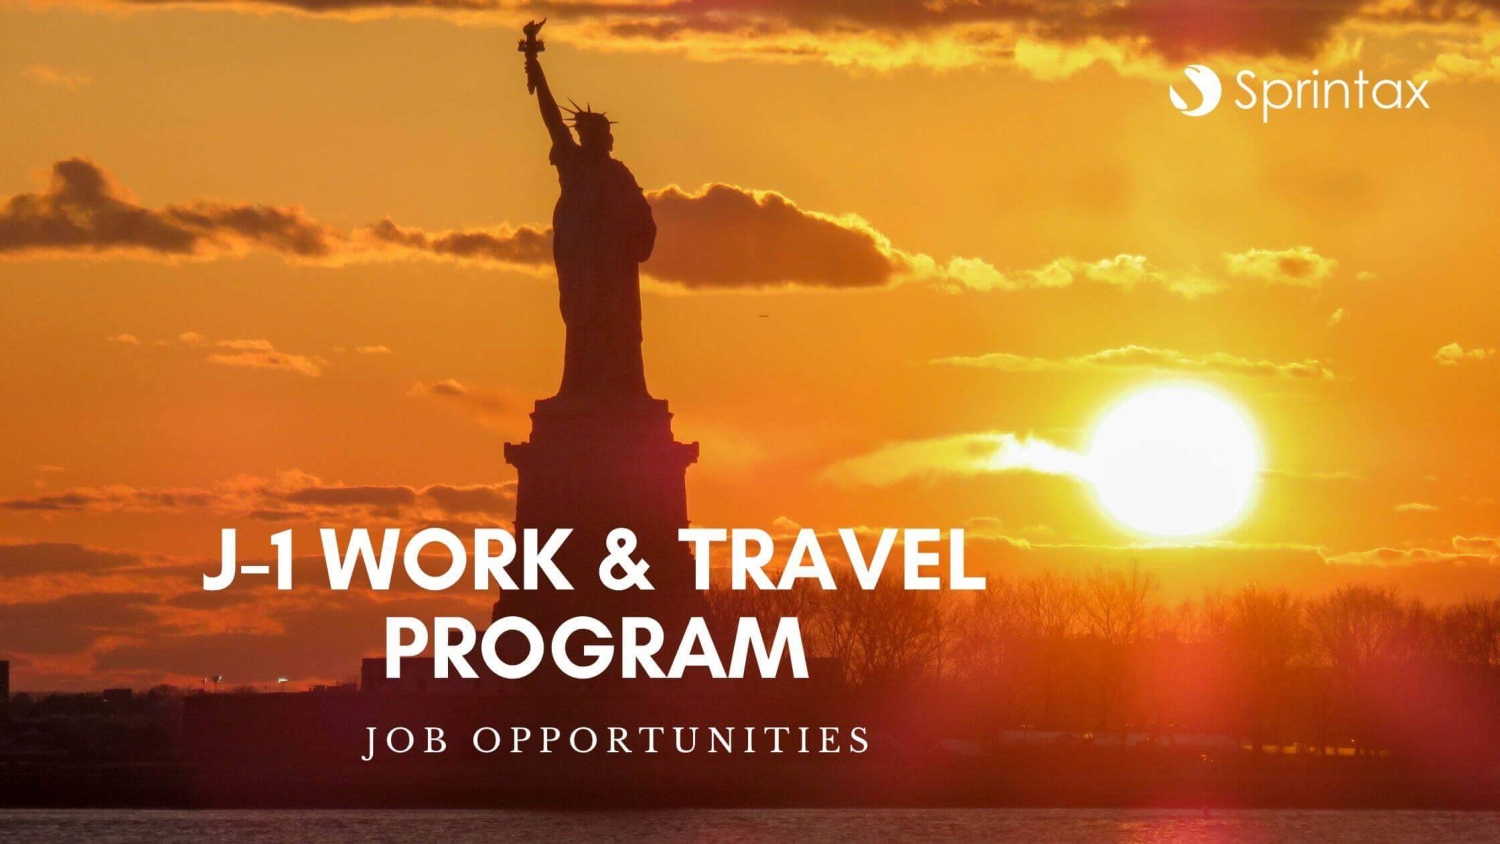 J-1 Work and Travel job opportunities